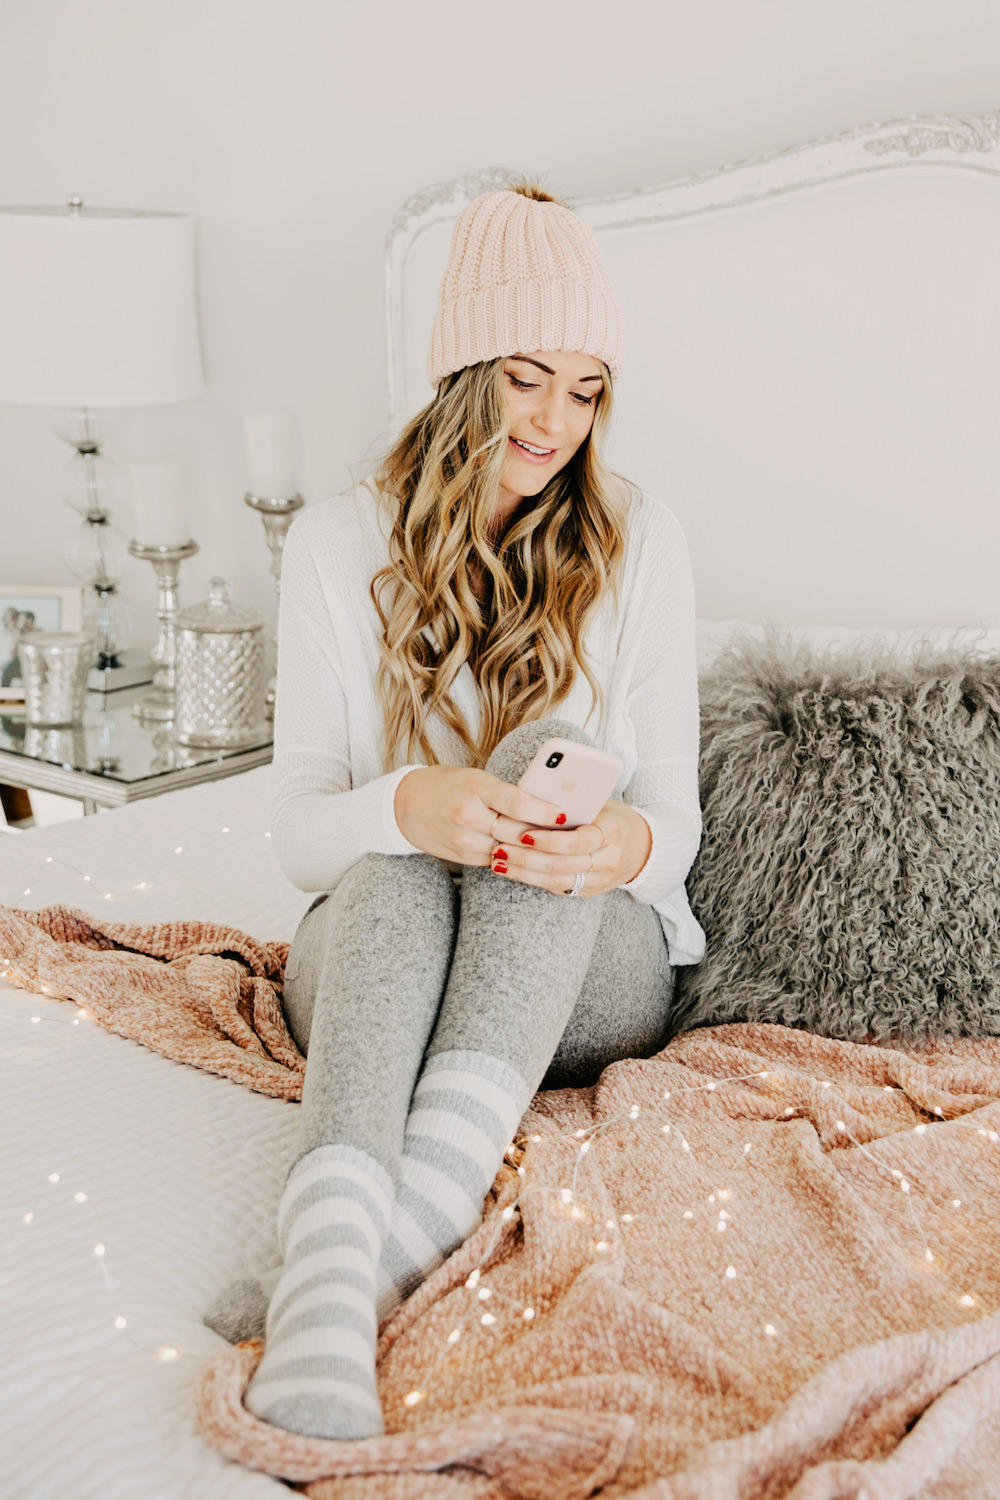 Get the Look! Cute Cozy Loungewear Outfits for Lazy Days! – Styling Frugal